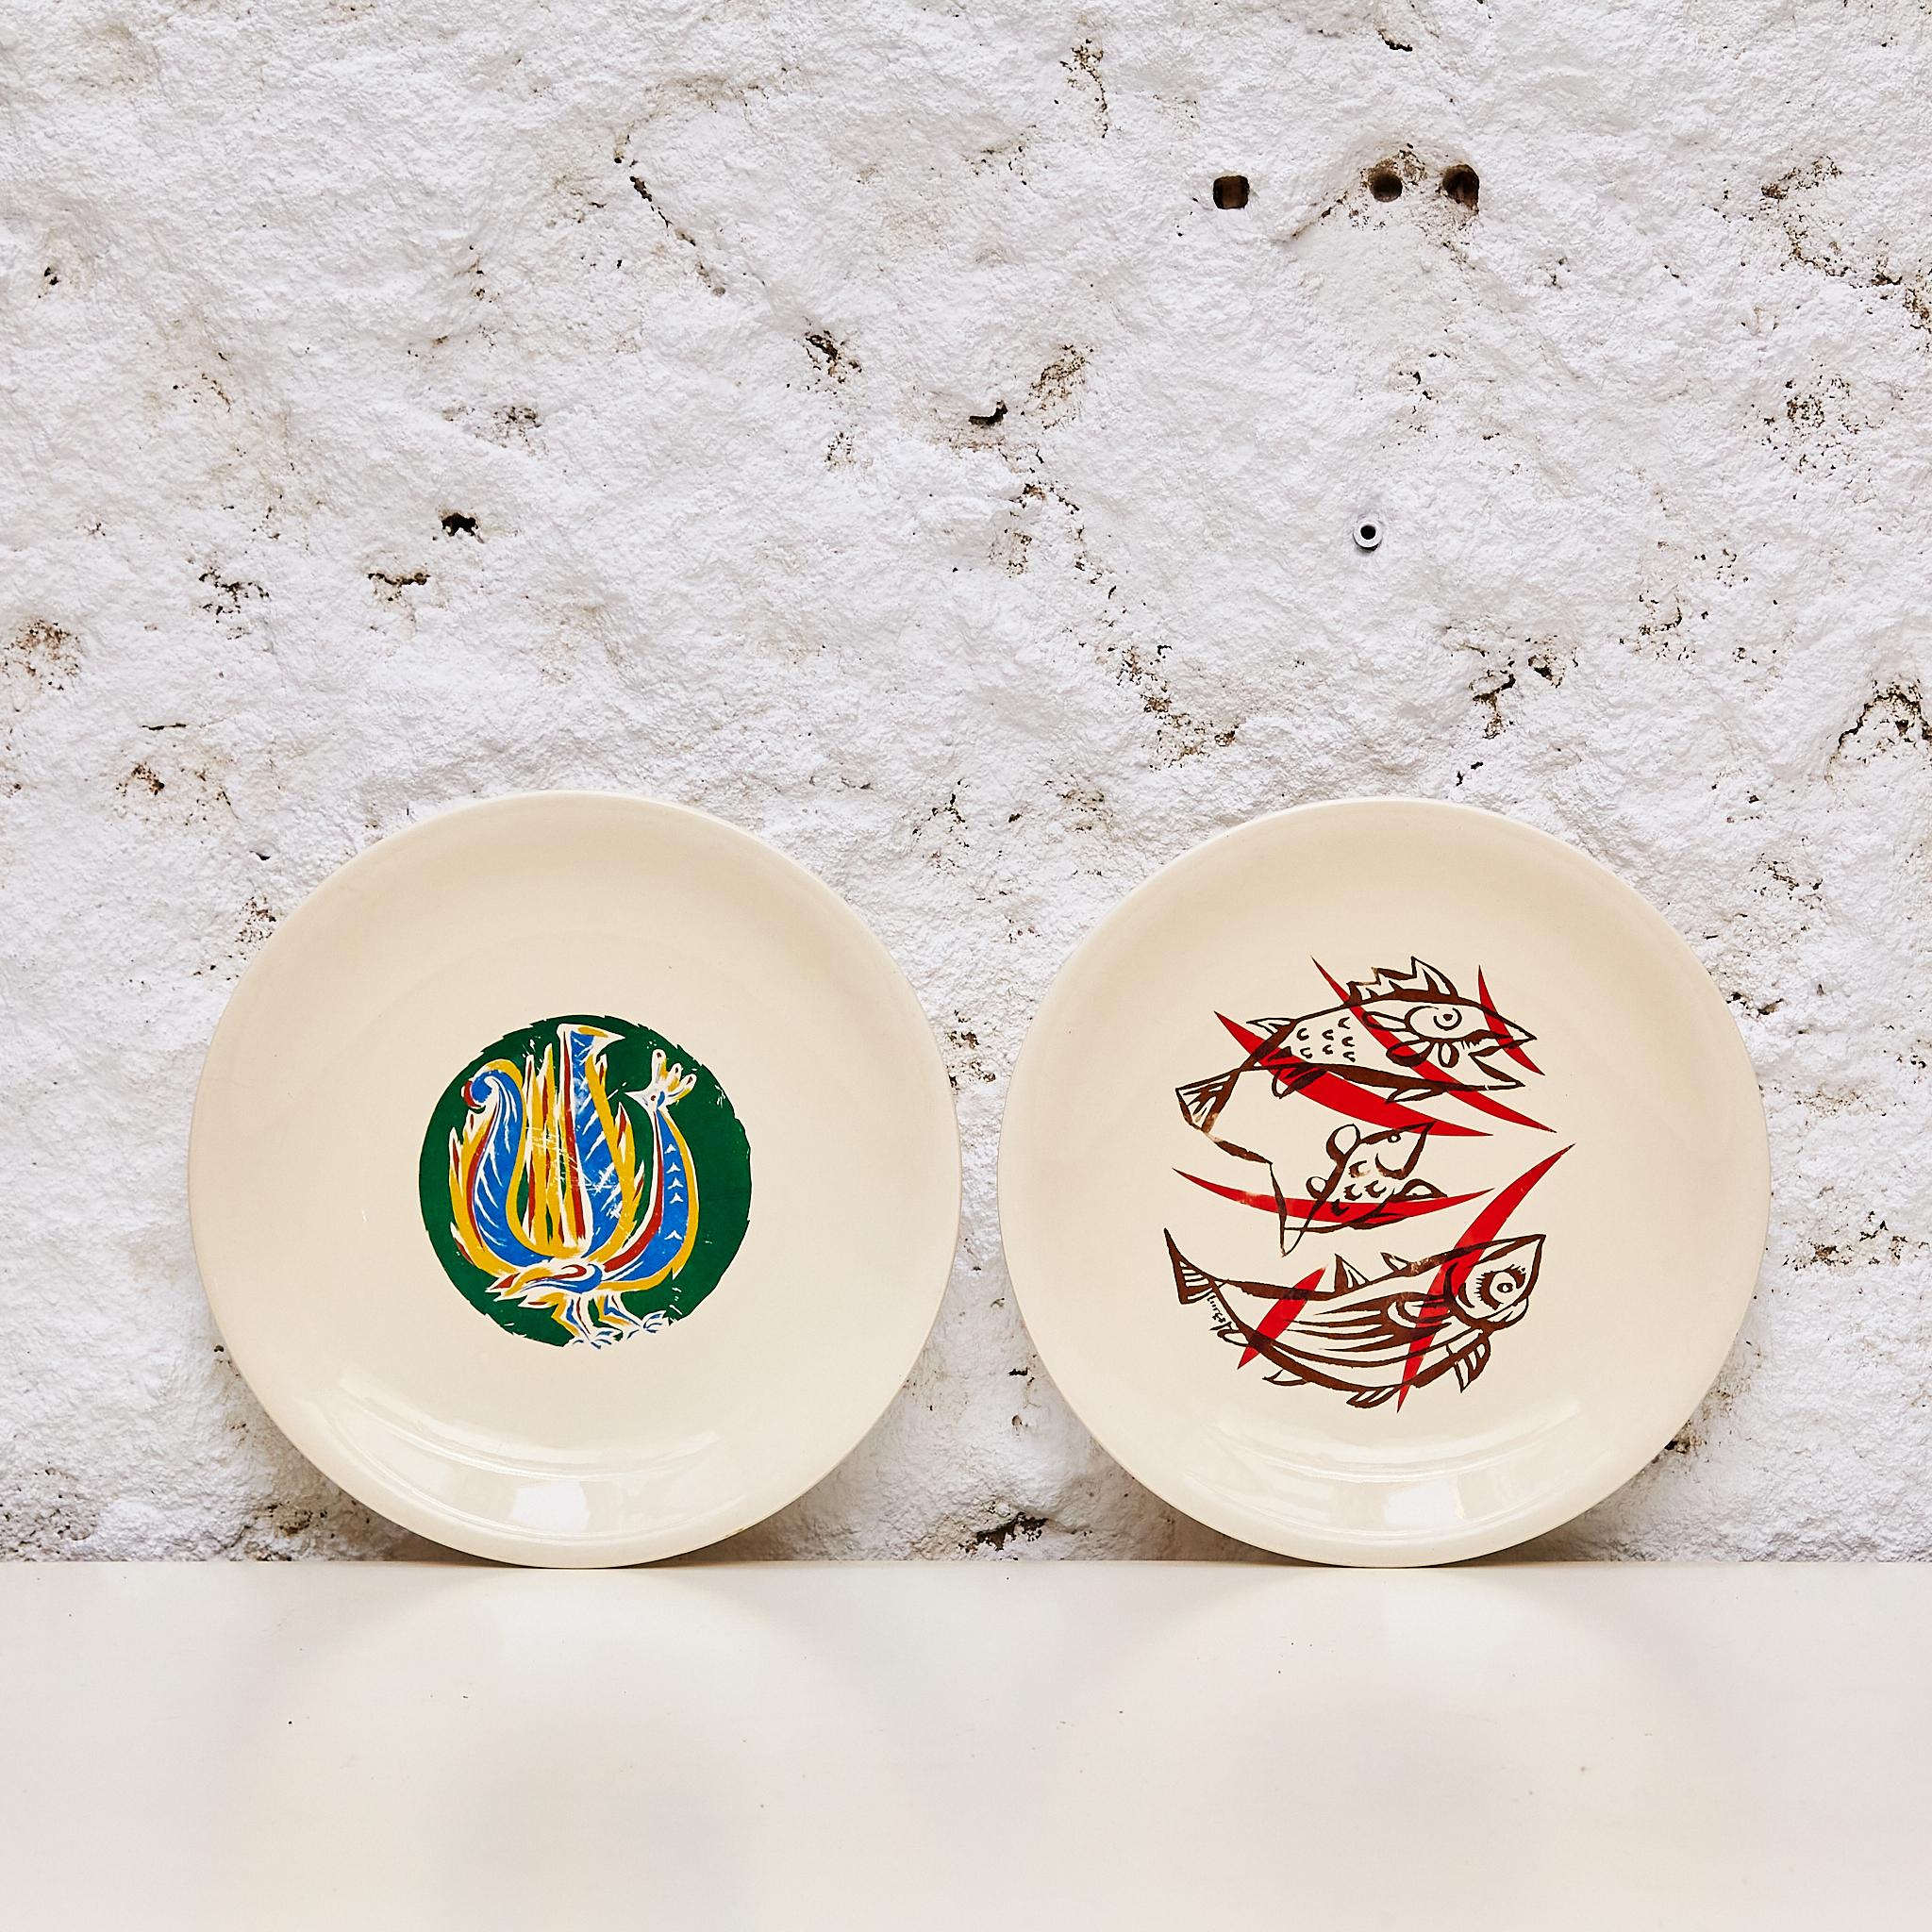 Experience refined craftsmanship with this captivating set of two plates by Marc Saint-Seans, originating from 1950s France. Each plate is graced with the artist's signature and stamp, embodying the timeless allure of artistic creation.

Measuring